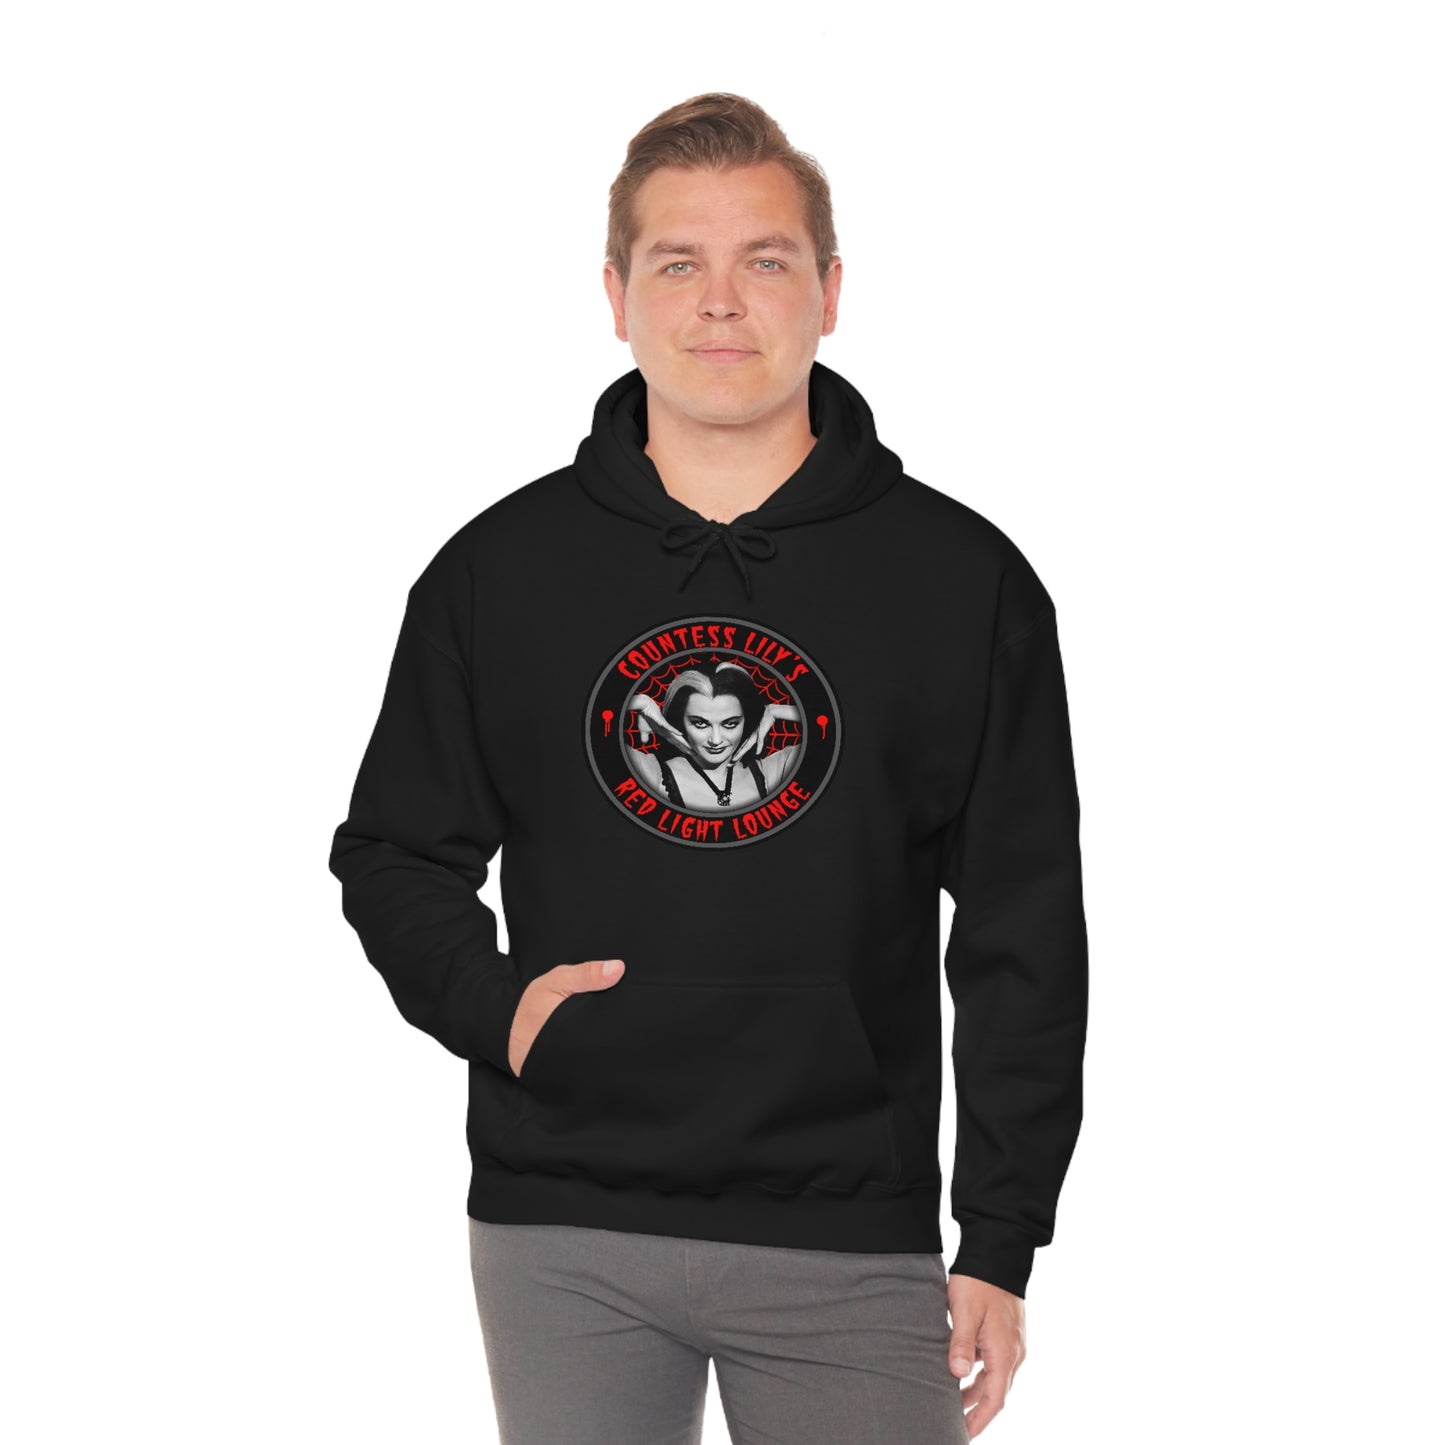 COUNTESS LILY - RED LIGHT LOUNGE Unisex Heavy Blend™ Hooded Sweatshirt